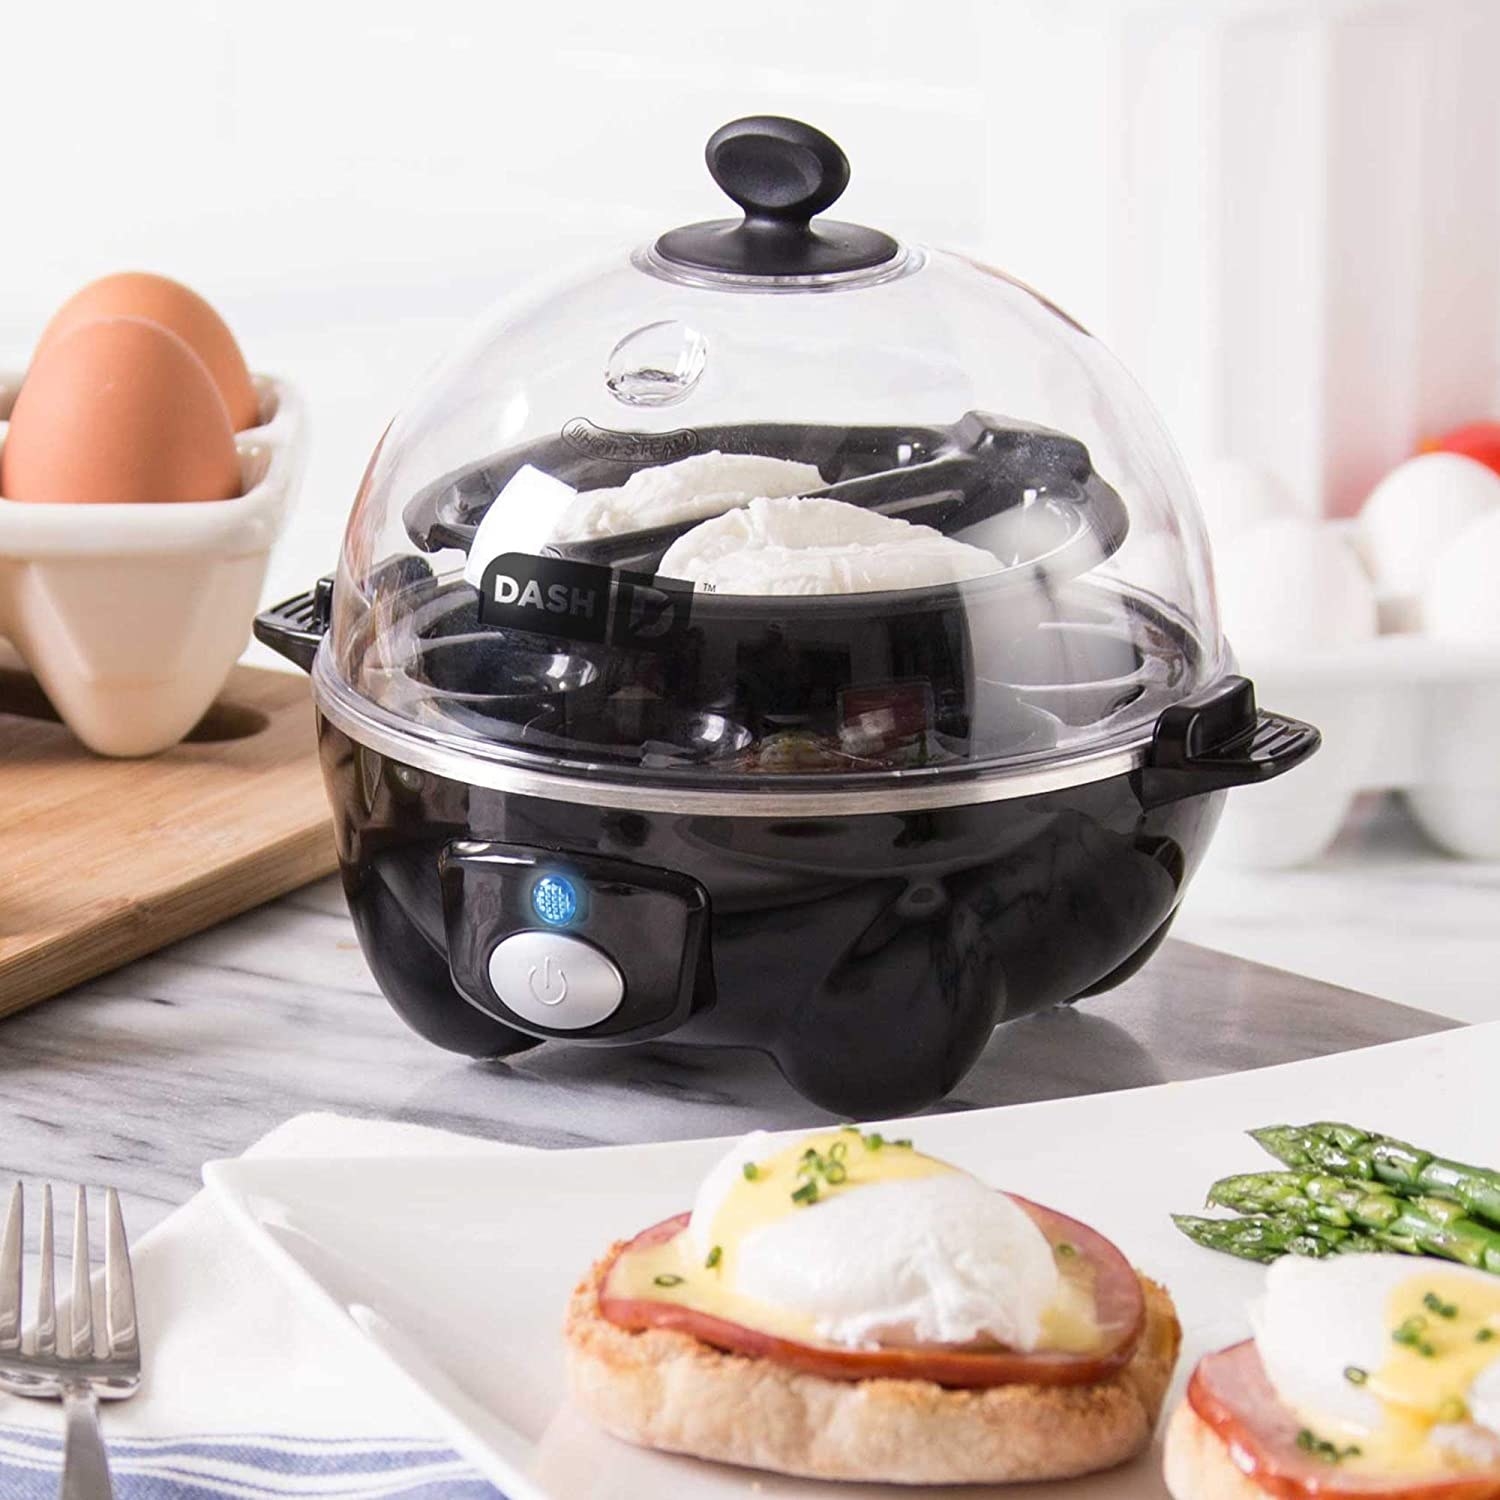 Egg cooker on table next to egg muffin sandwich